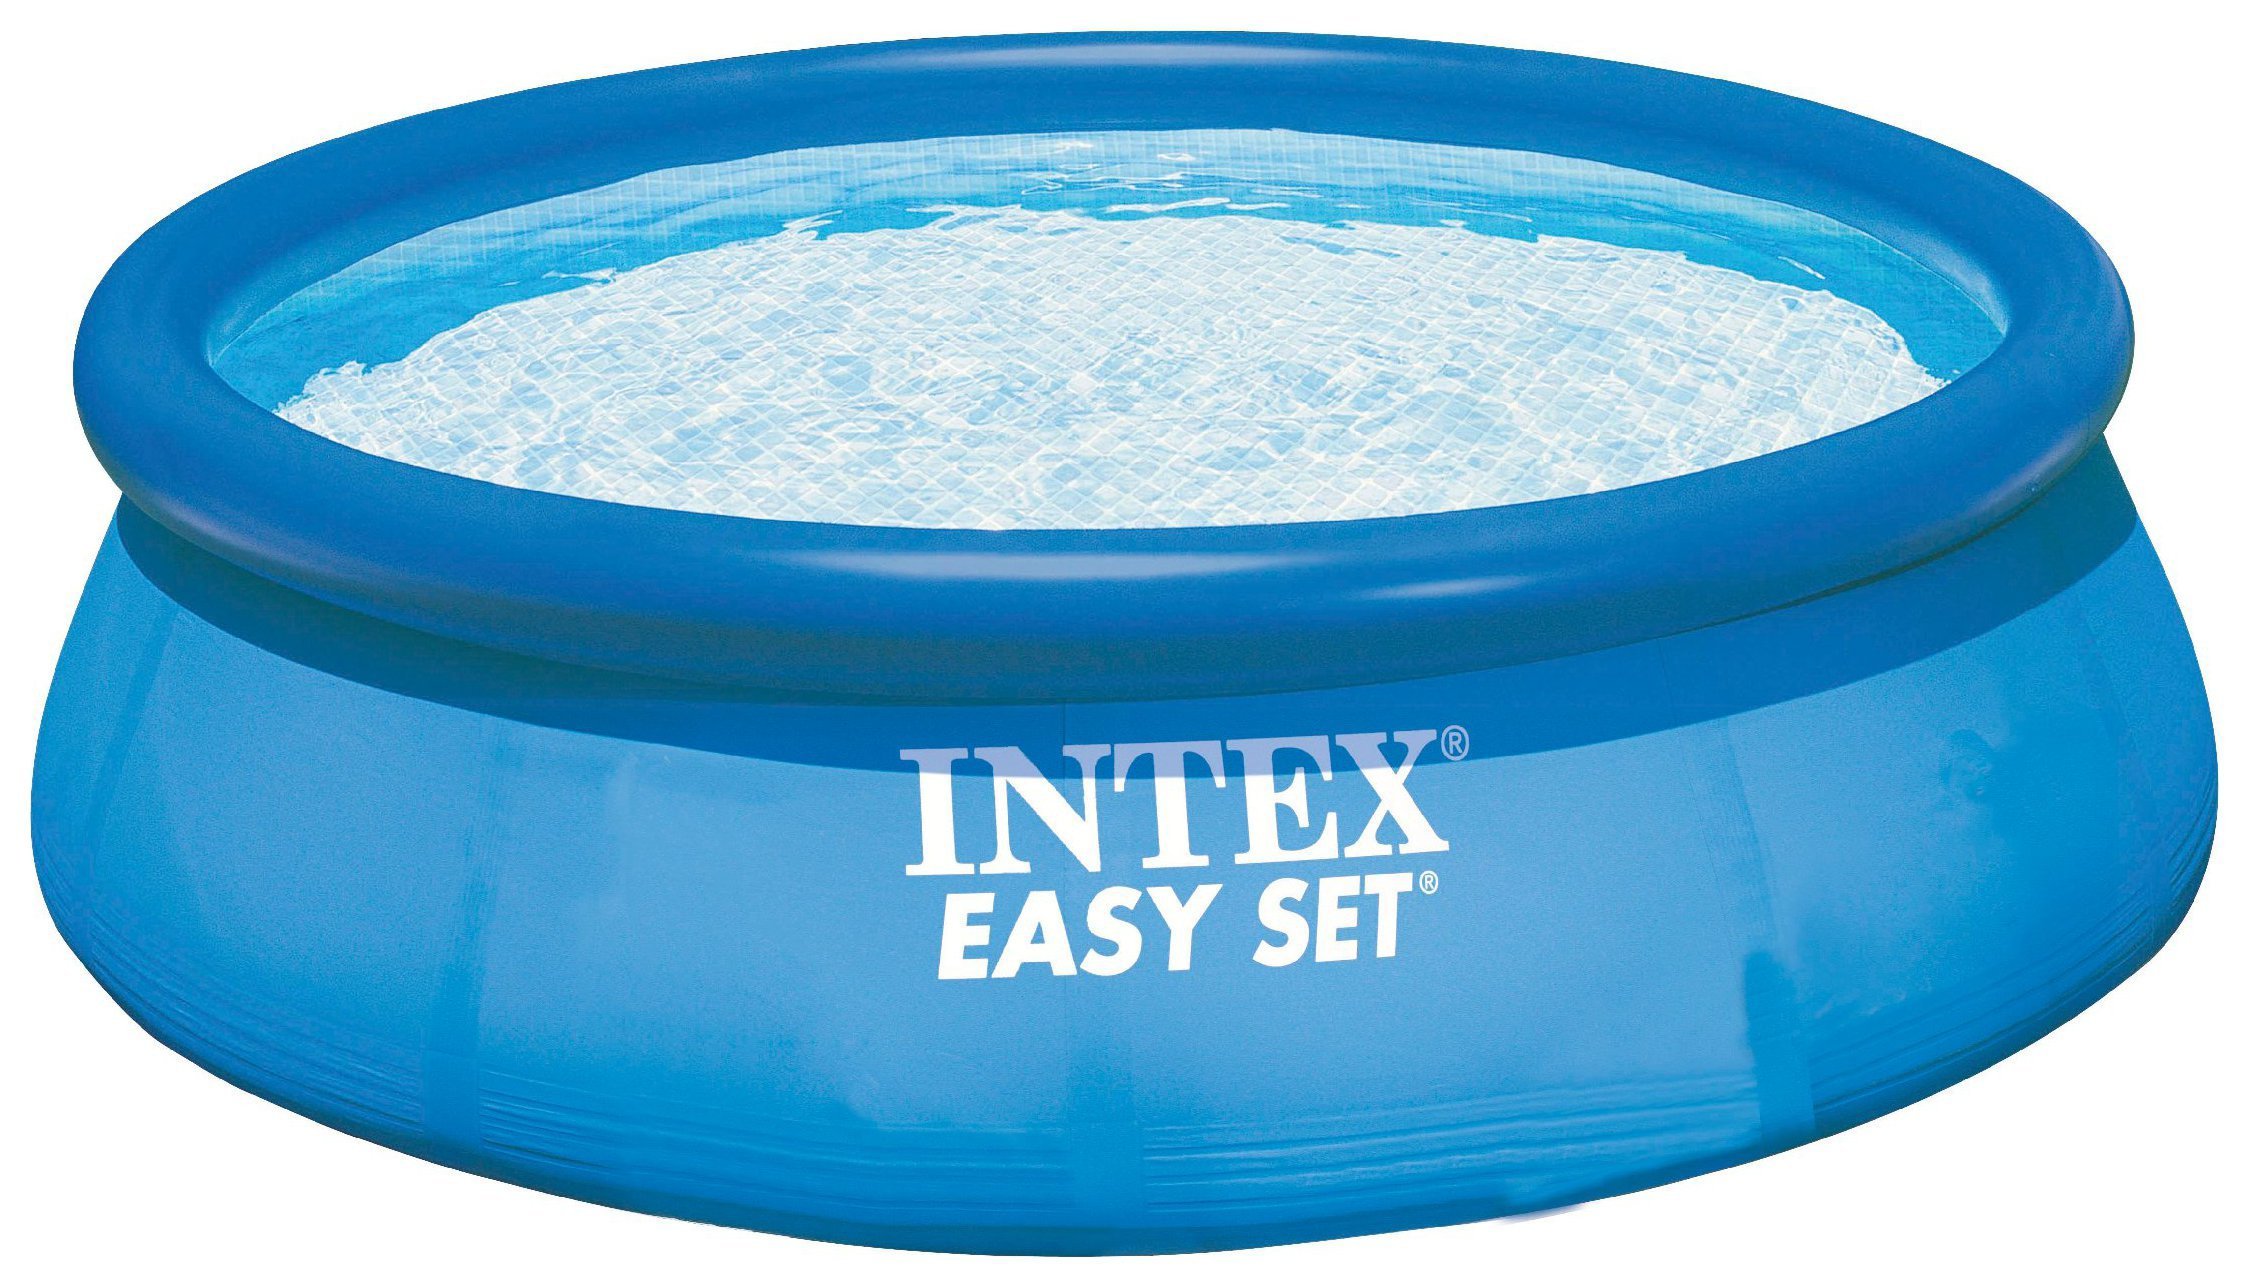 Intex 8ft Easy Set Round Family Pool Review